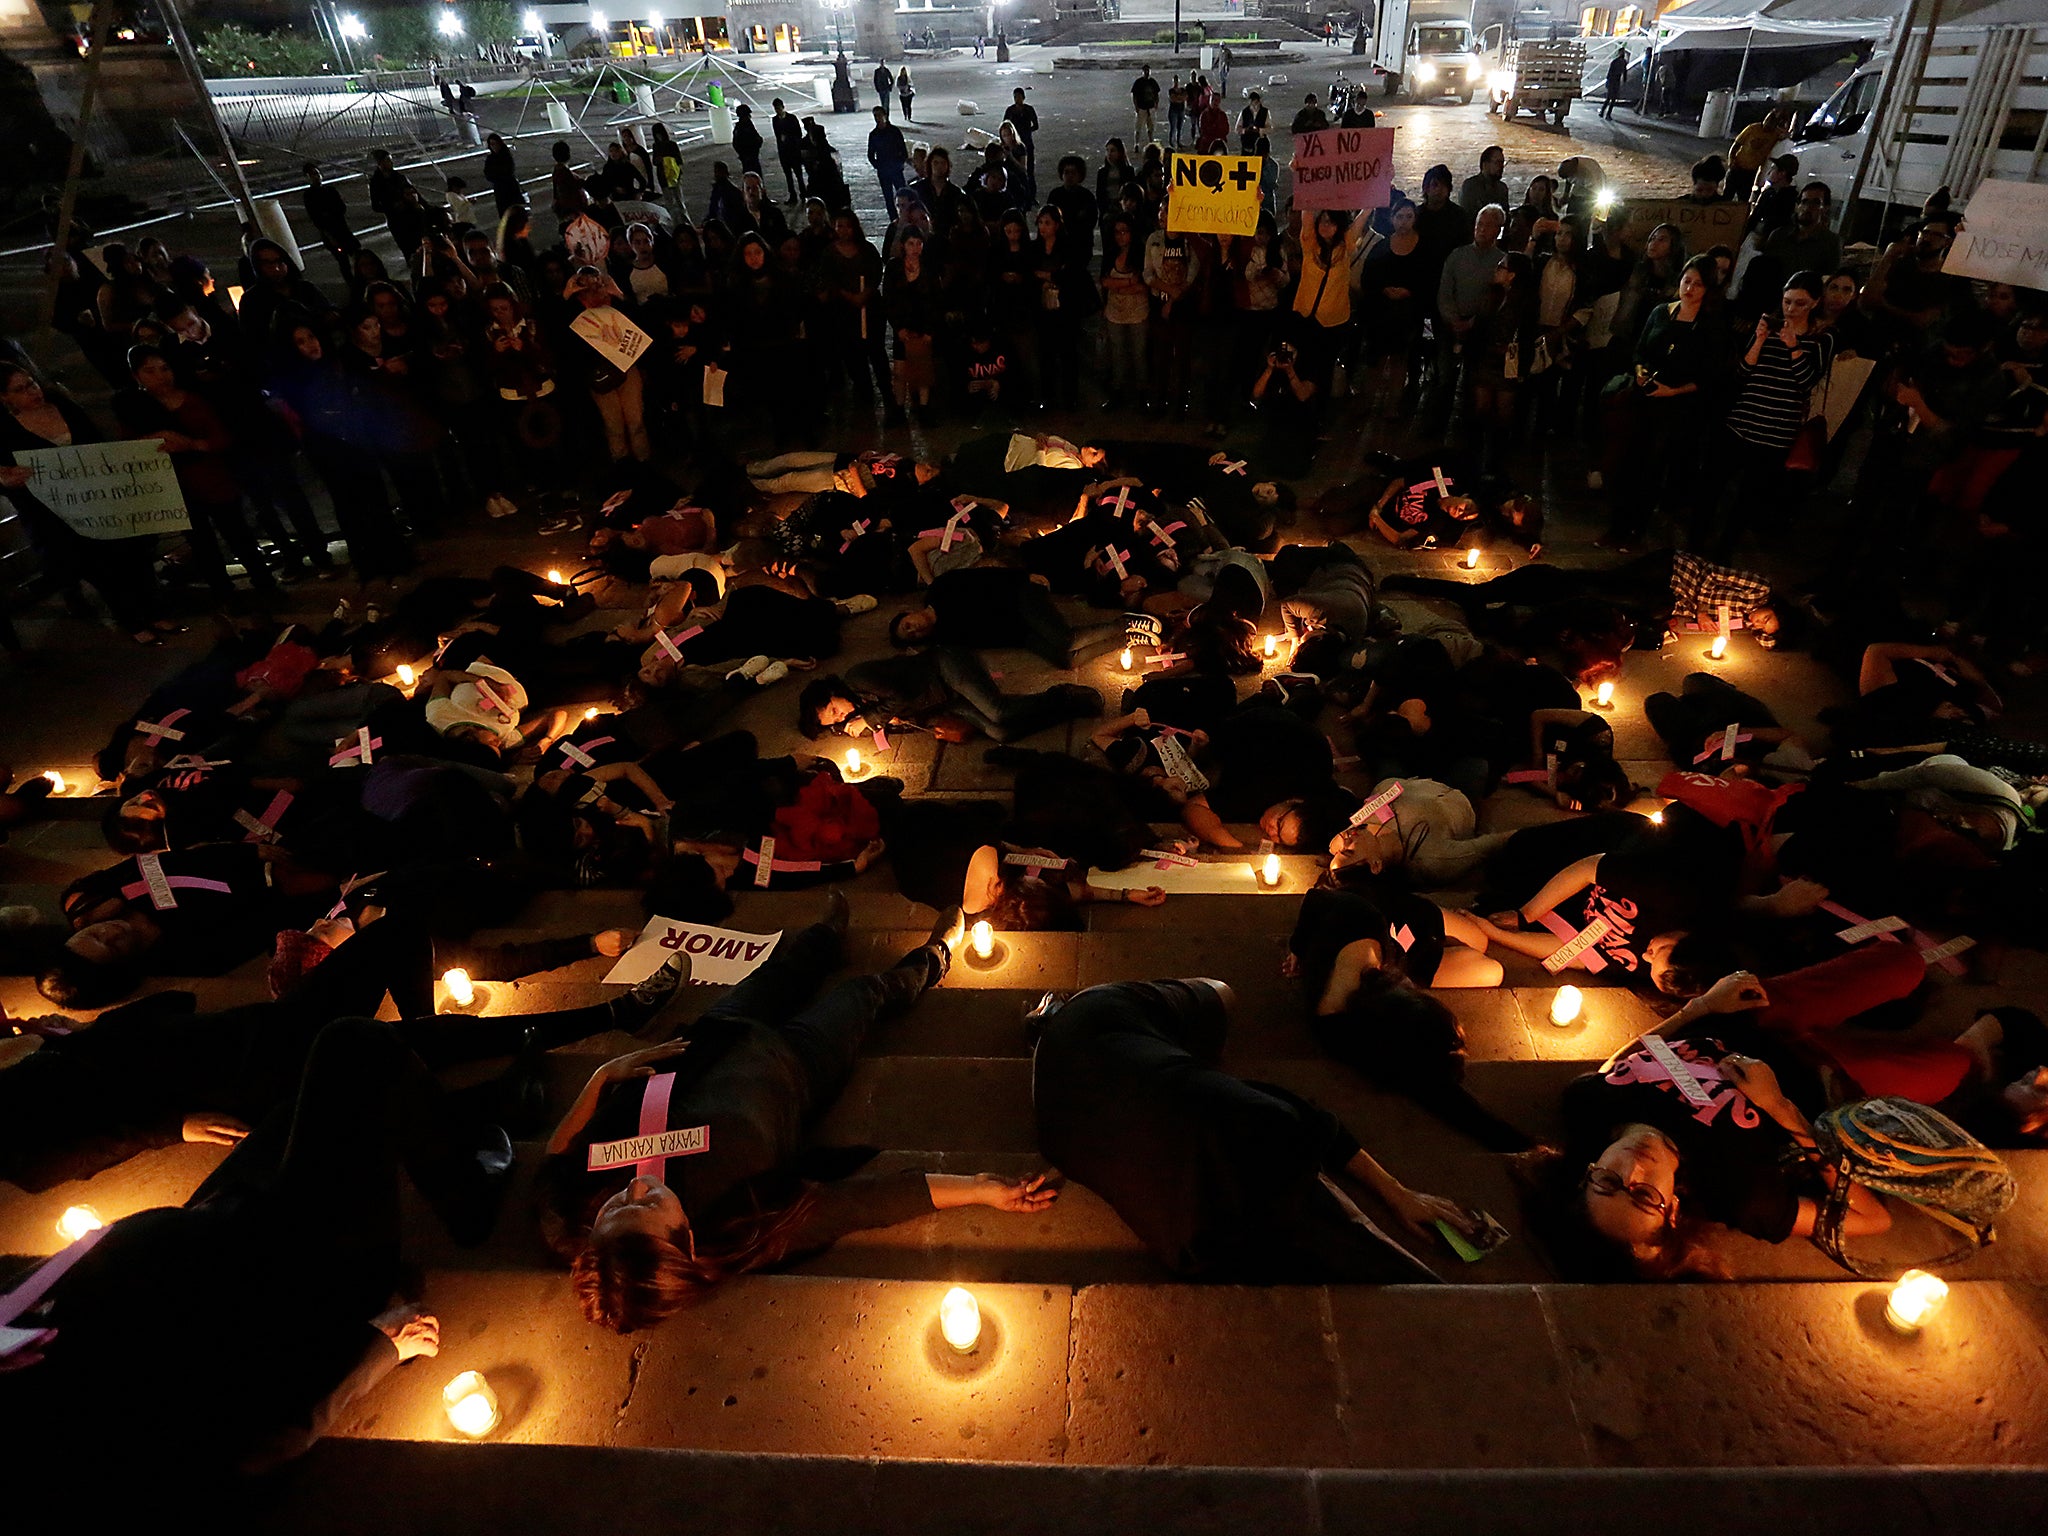 Women lie on the ground during a rally in Mexico against gender violence in November